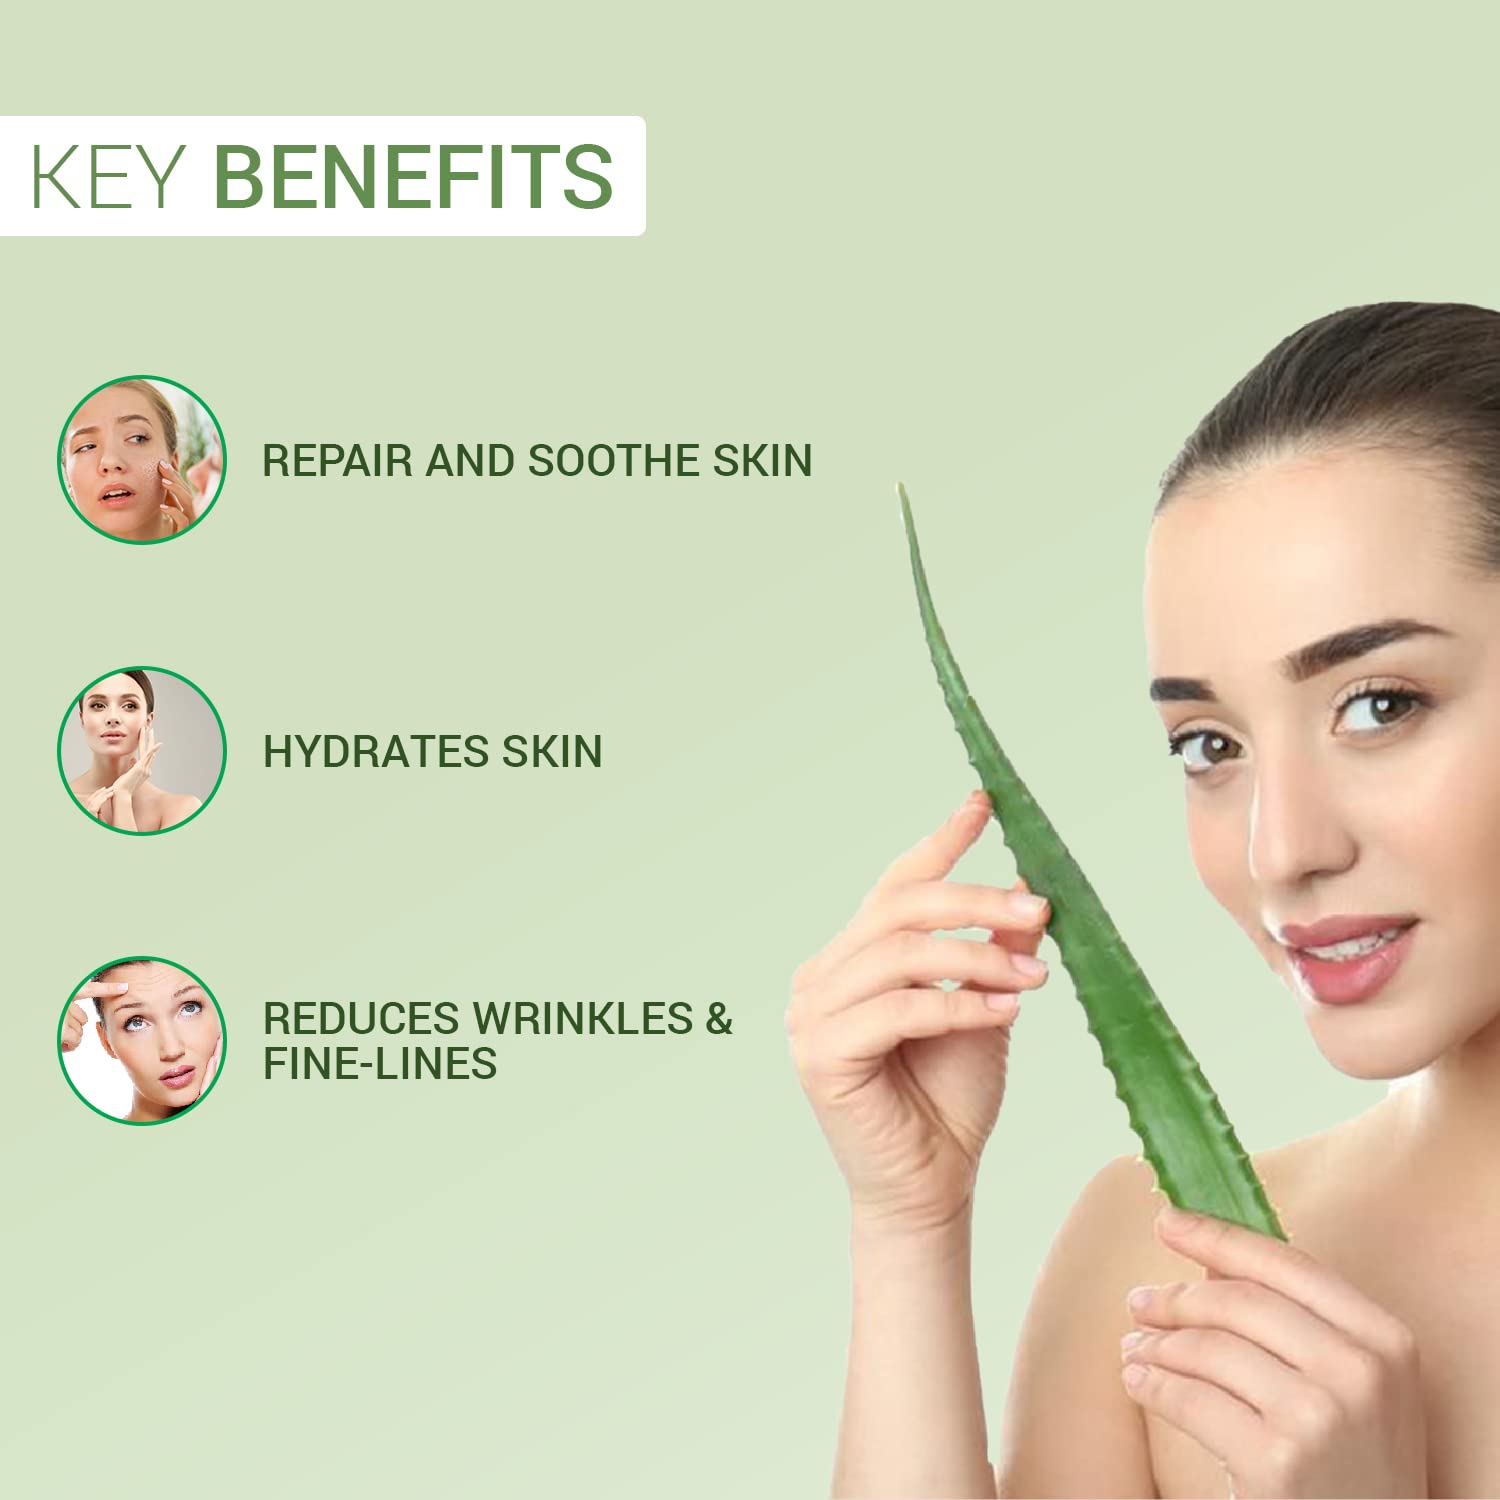 Rejusure Aloe Vera Gel for Face, Skin, Sunburn Relief Moisturizing, Acne, Gives Hydration and Cooling Effect Suitable for All Skin Types,Multi-Purpose Aloe Vera Gel Formulated for Men & Women – 100 Gm